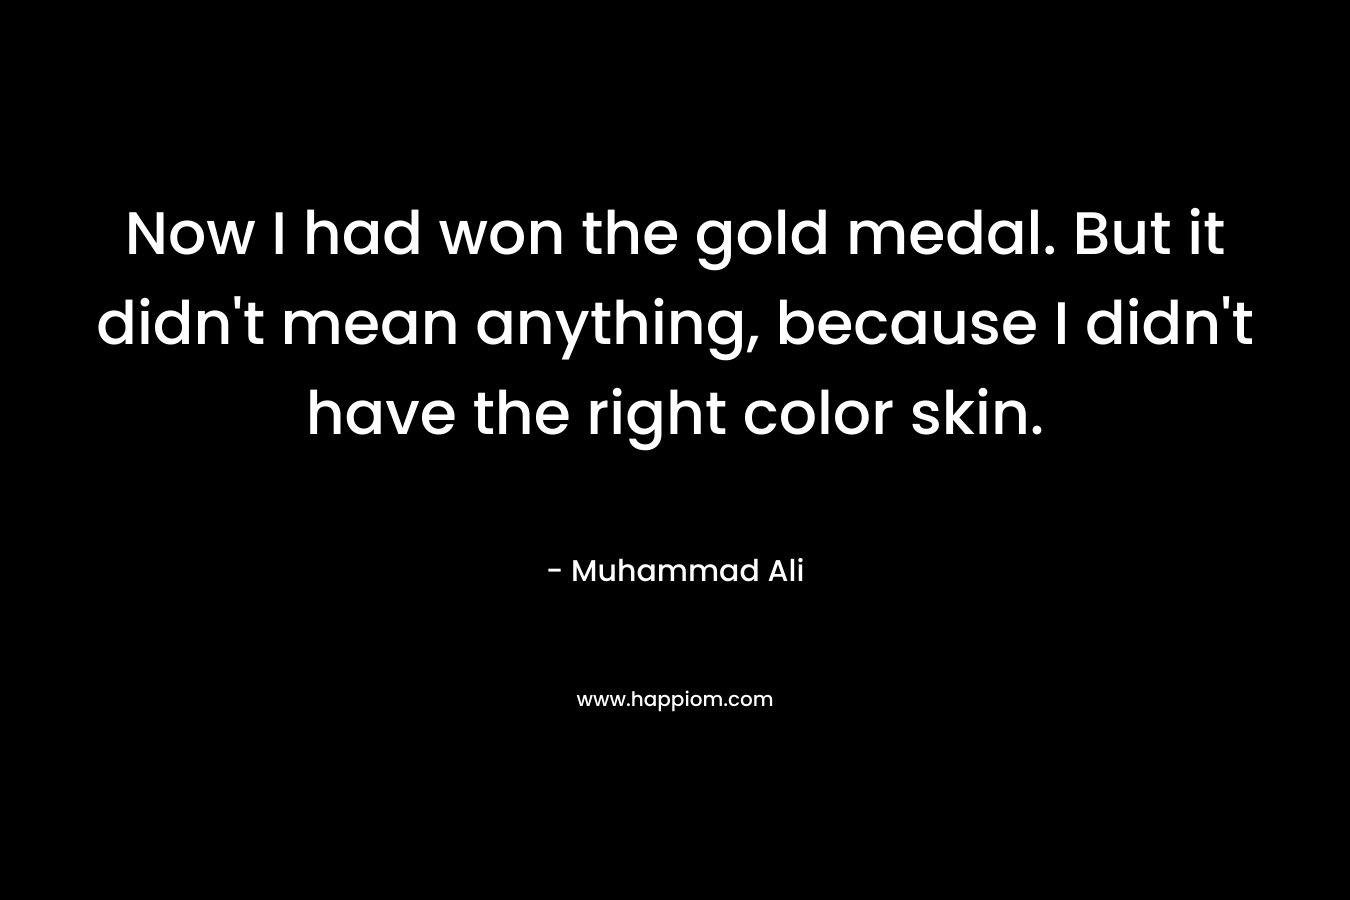 Now I had won the gold medal. But it didn’t mean anything, because I didn’t have the right color skin. – Muhammad Ali